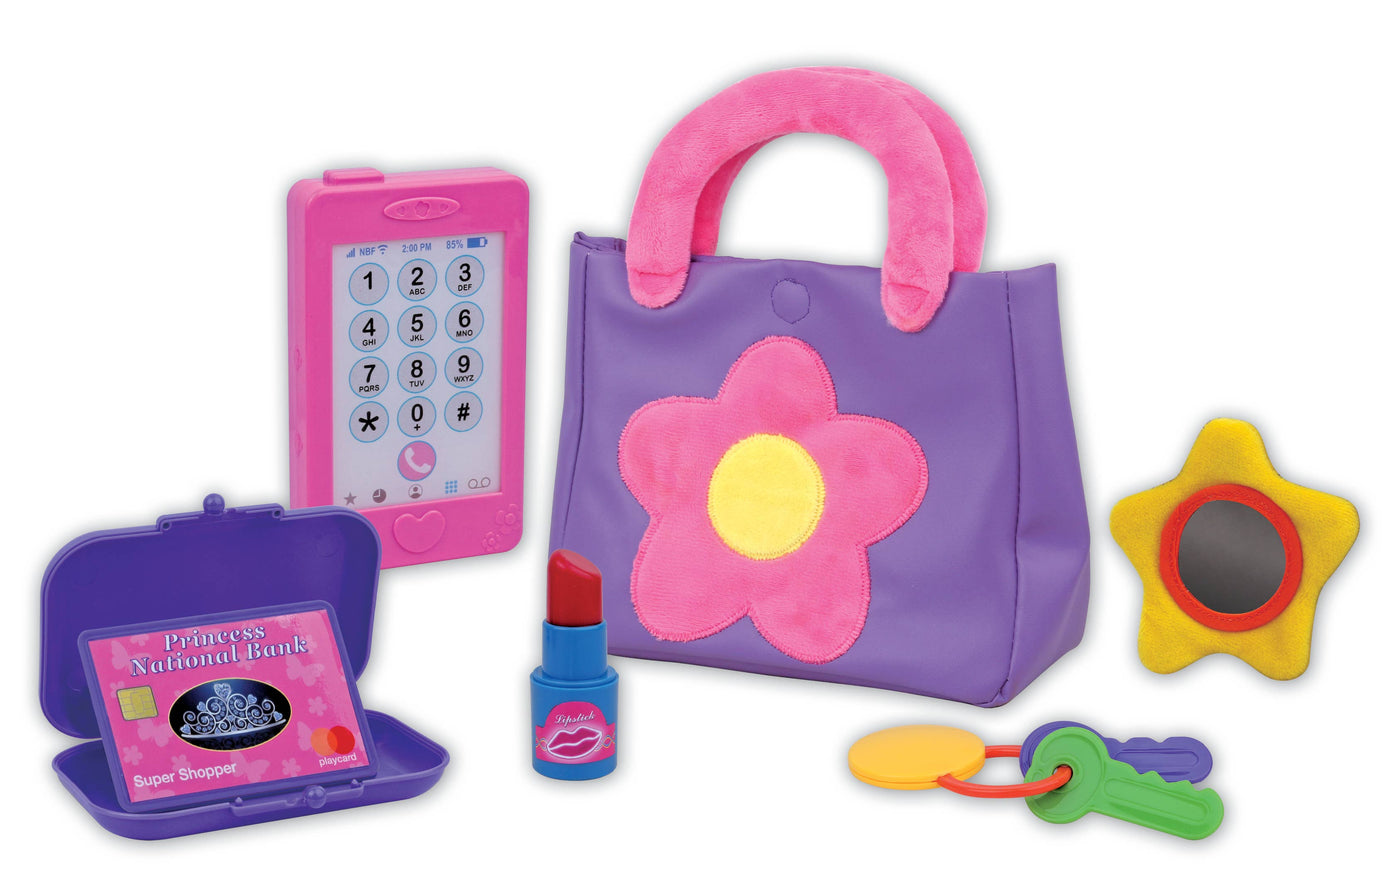 Nothing But Fun Toys - Let's Pretend Play Purse Set